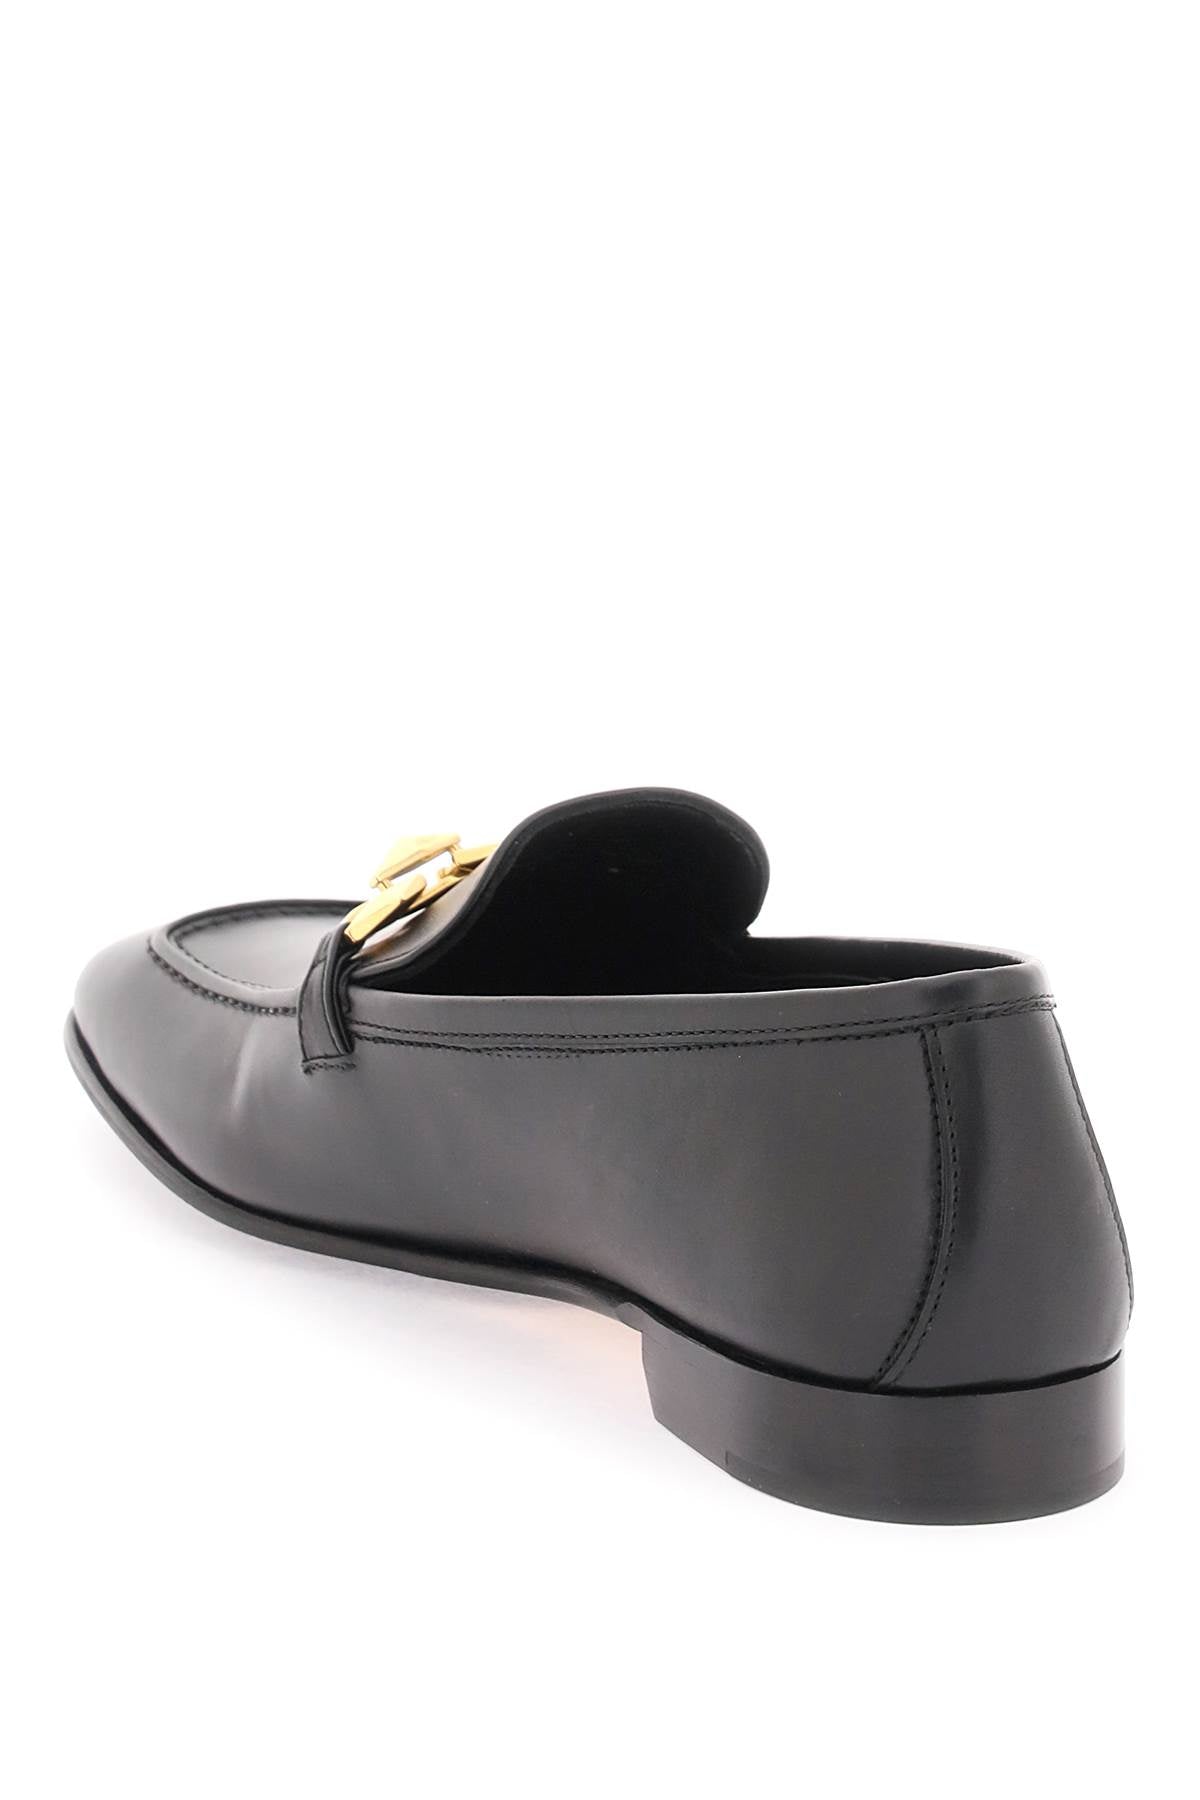 JIMMY CHOO Faceted Chain Moccasins for Women in Black Leather